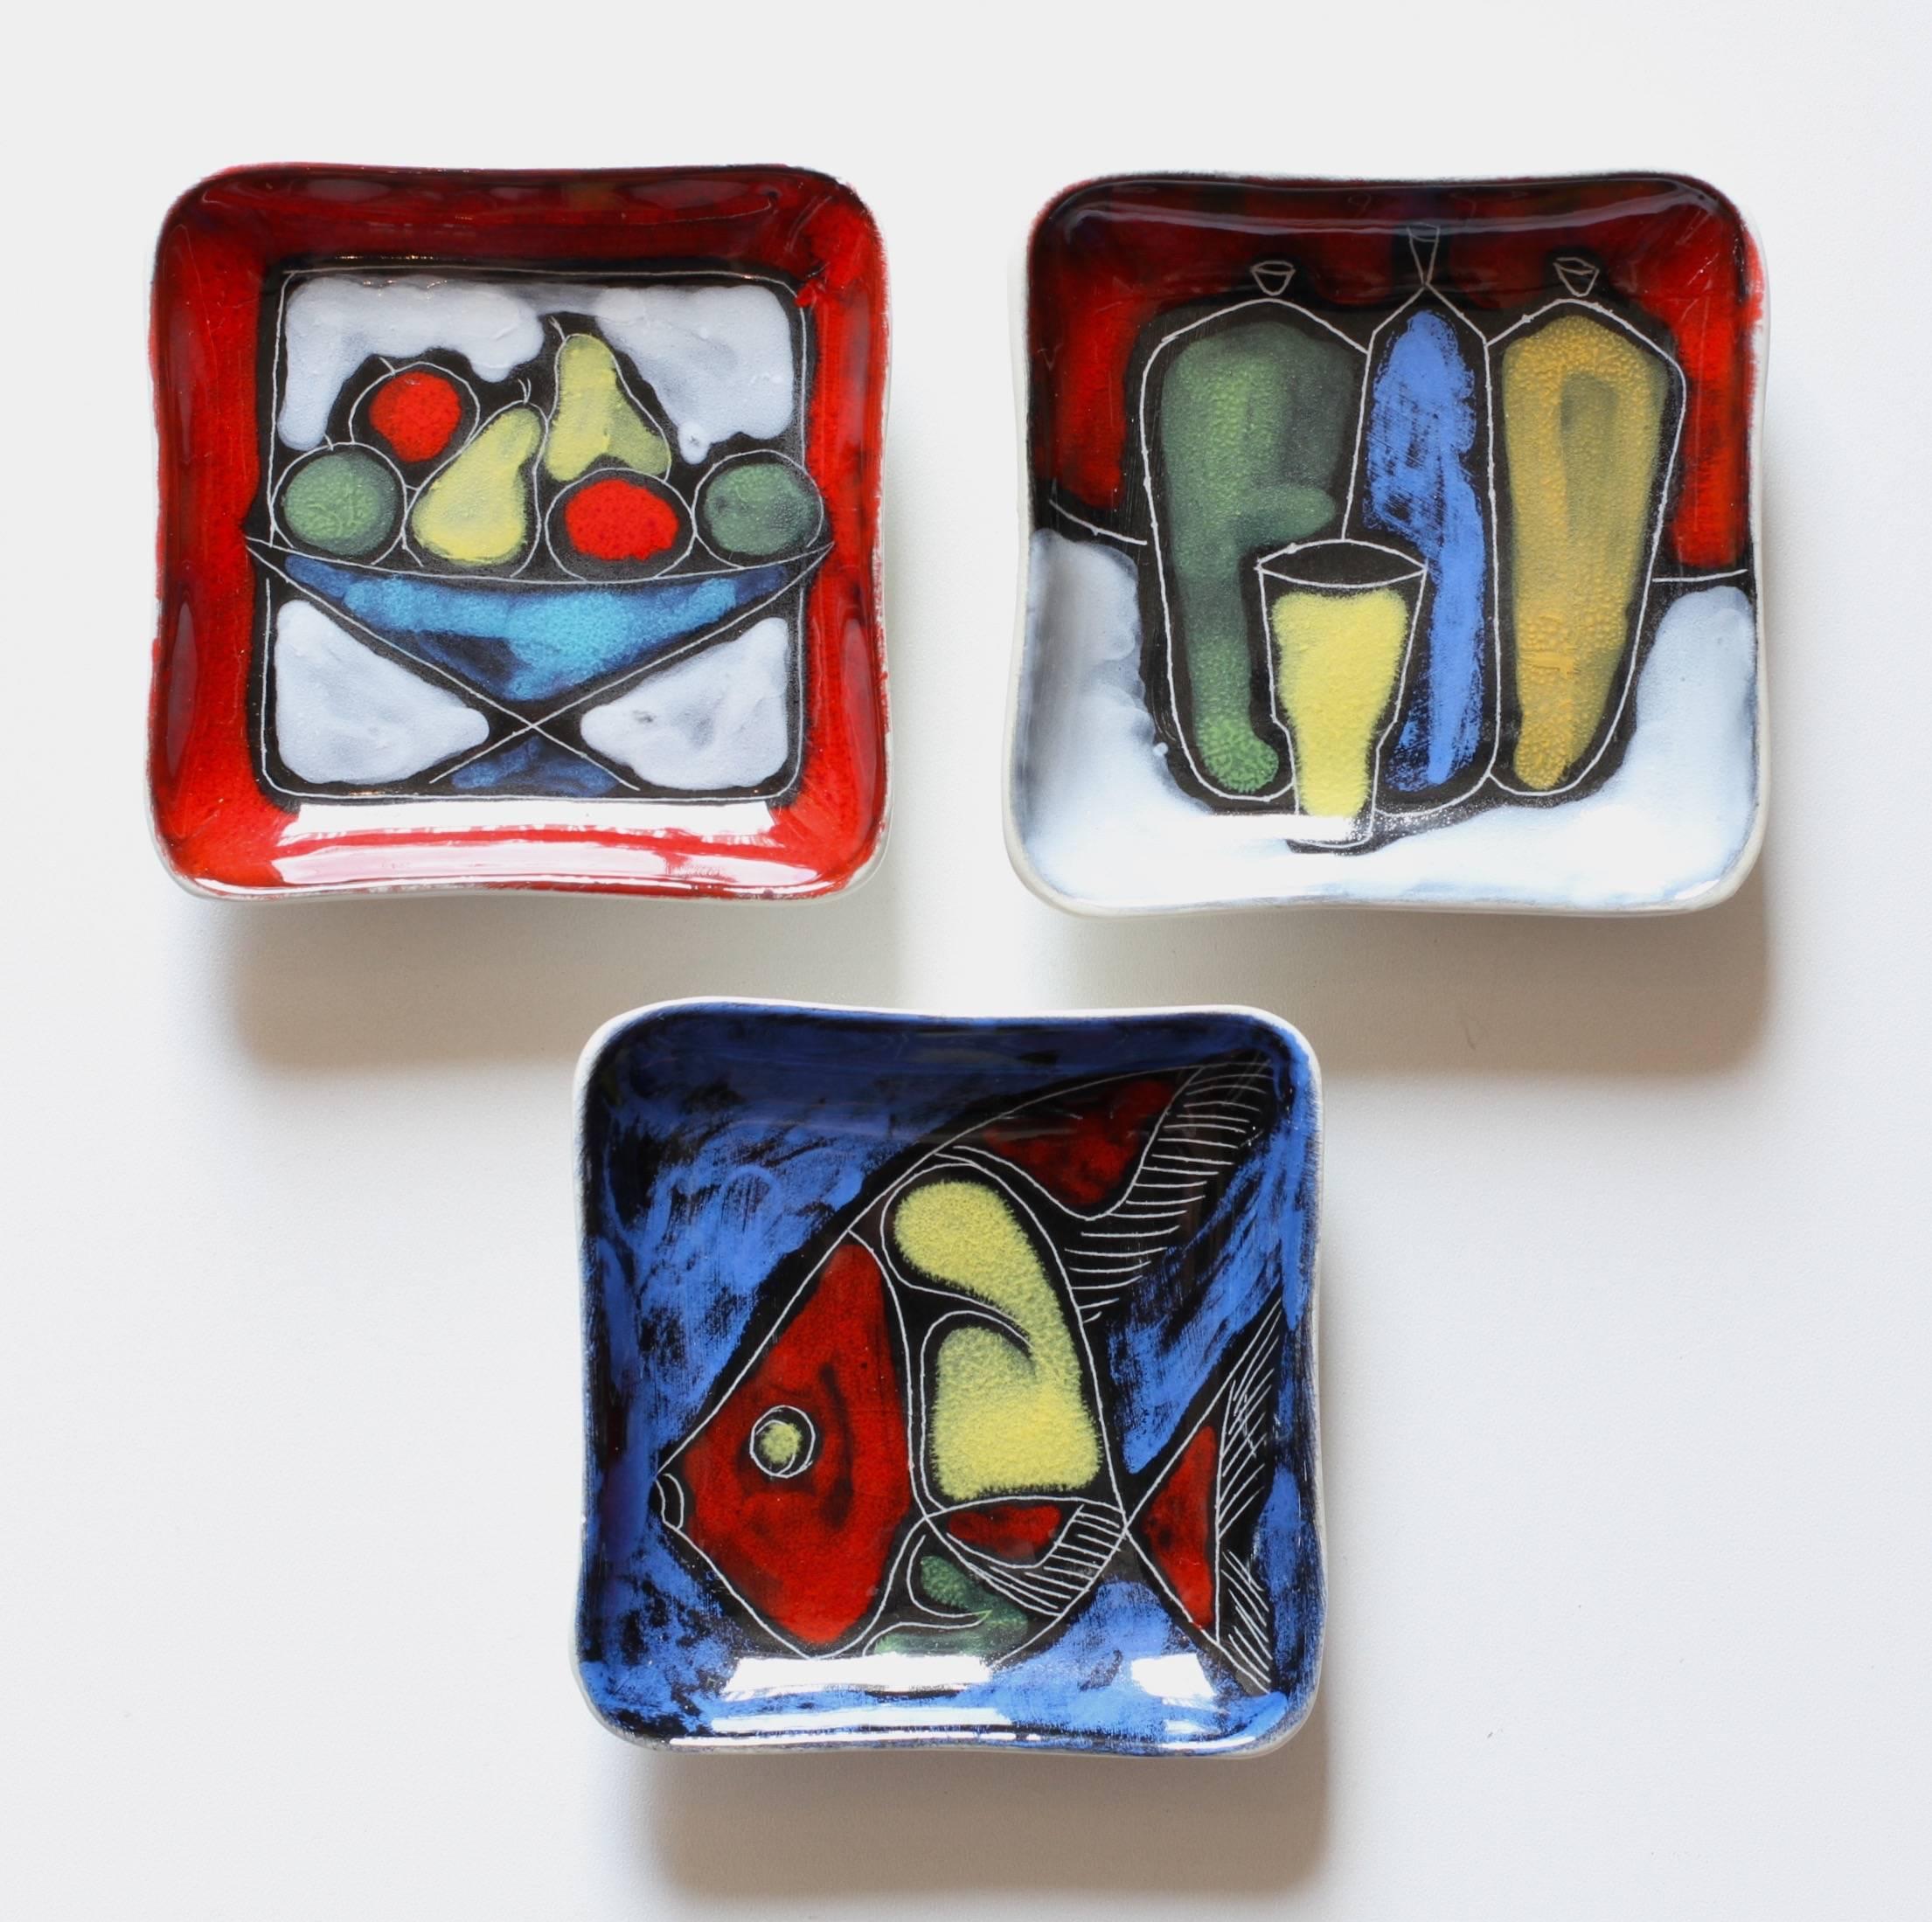 Beautiful set of three vintage Mid-Century Modern small serving bowls, ashtrays or dishes, made in Italy, circa late 1950s / early 1960s. Attributed to one of the various producers of pottery and ceramics in San Marino, Italy.

Featuring three